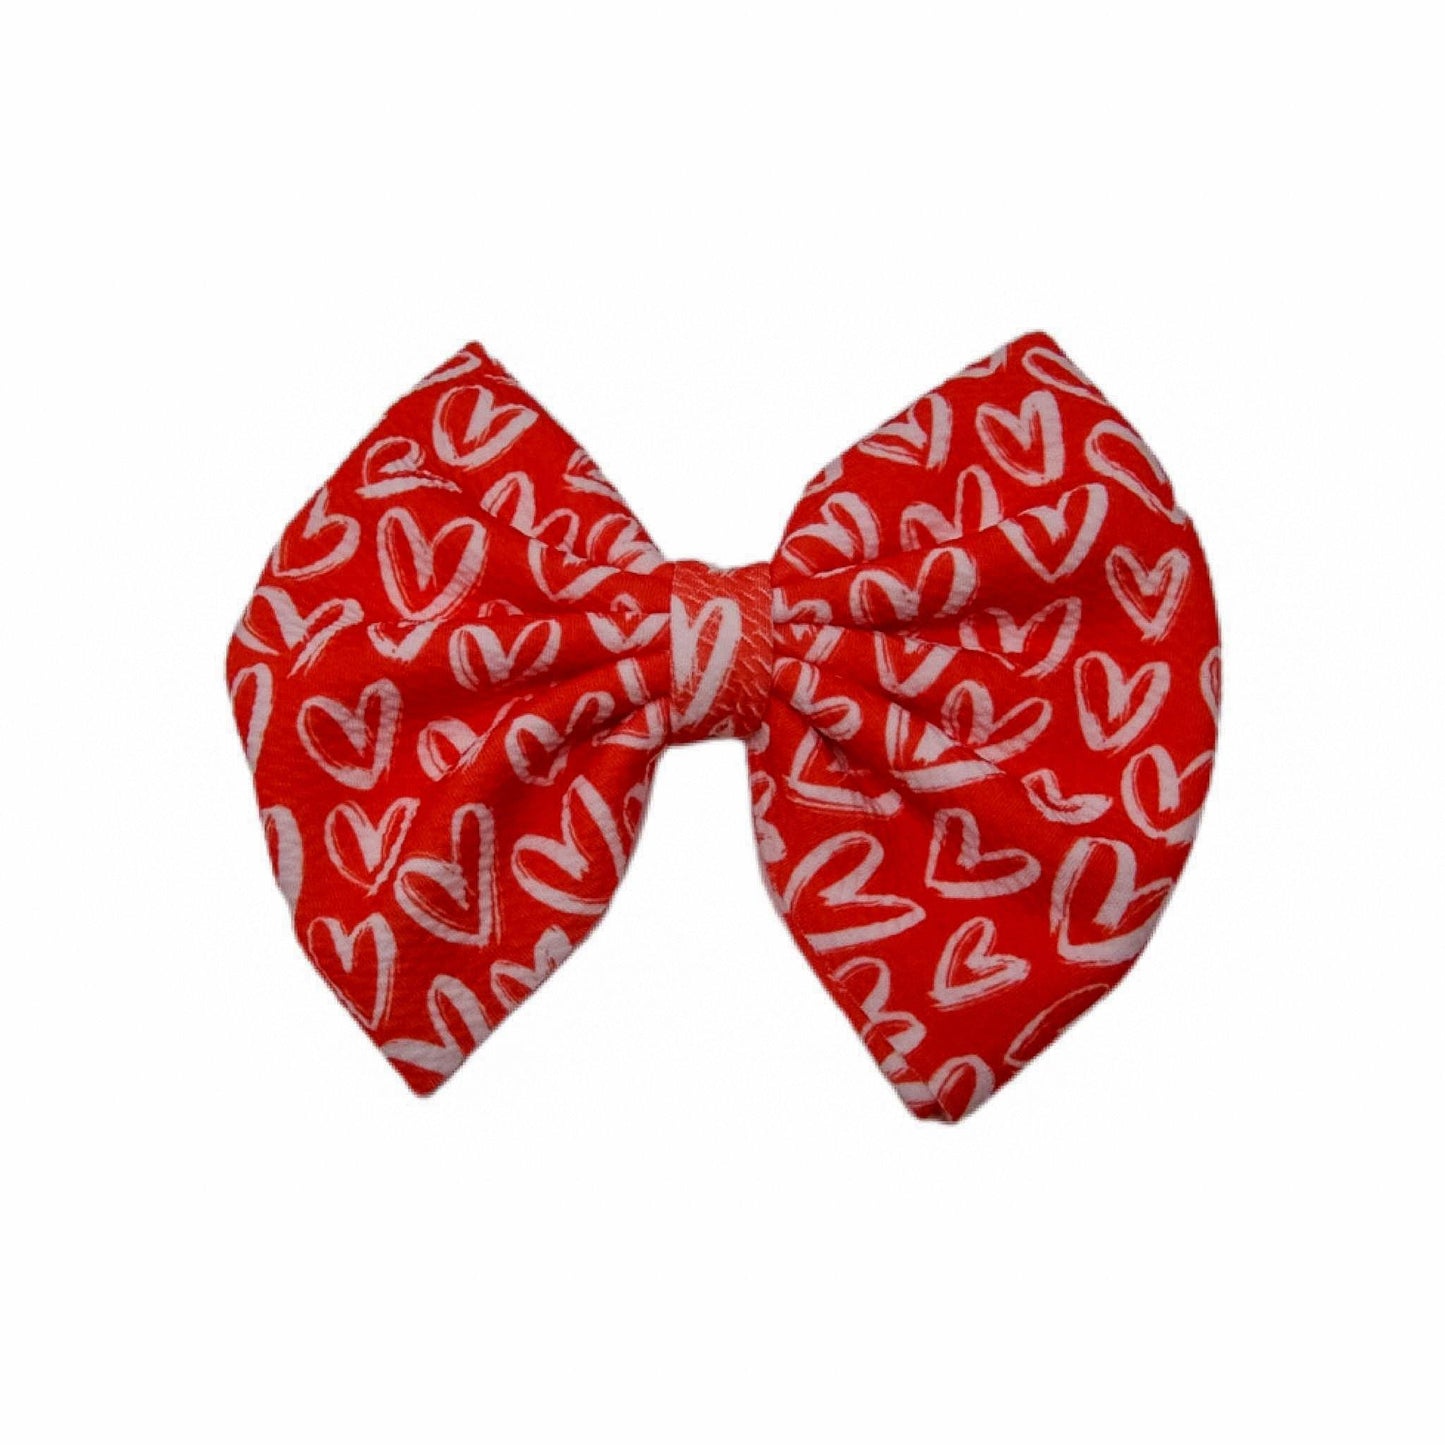 7 inch White Hearts on Red Fabric Bow